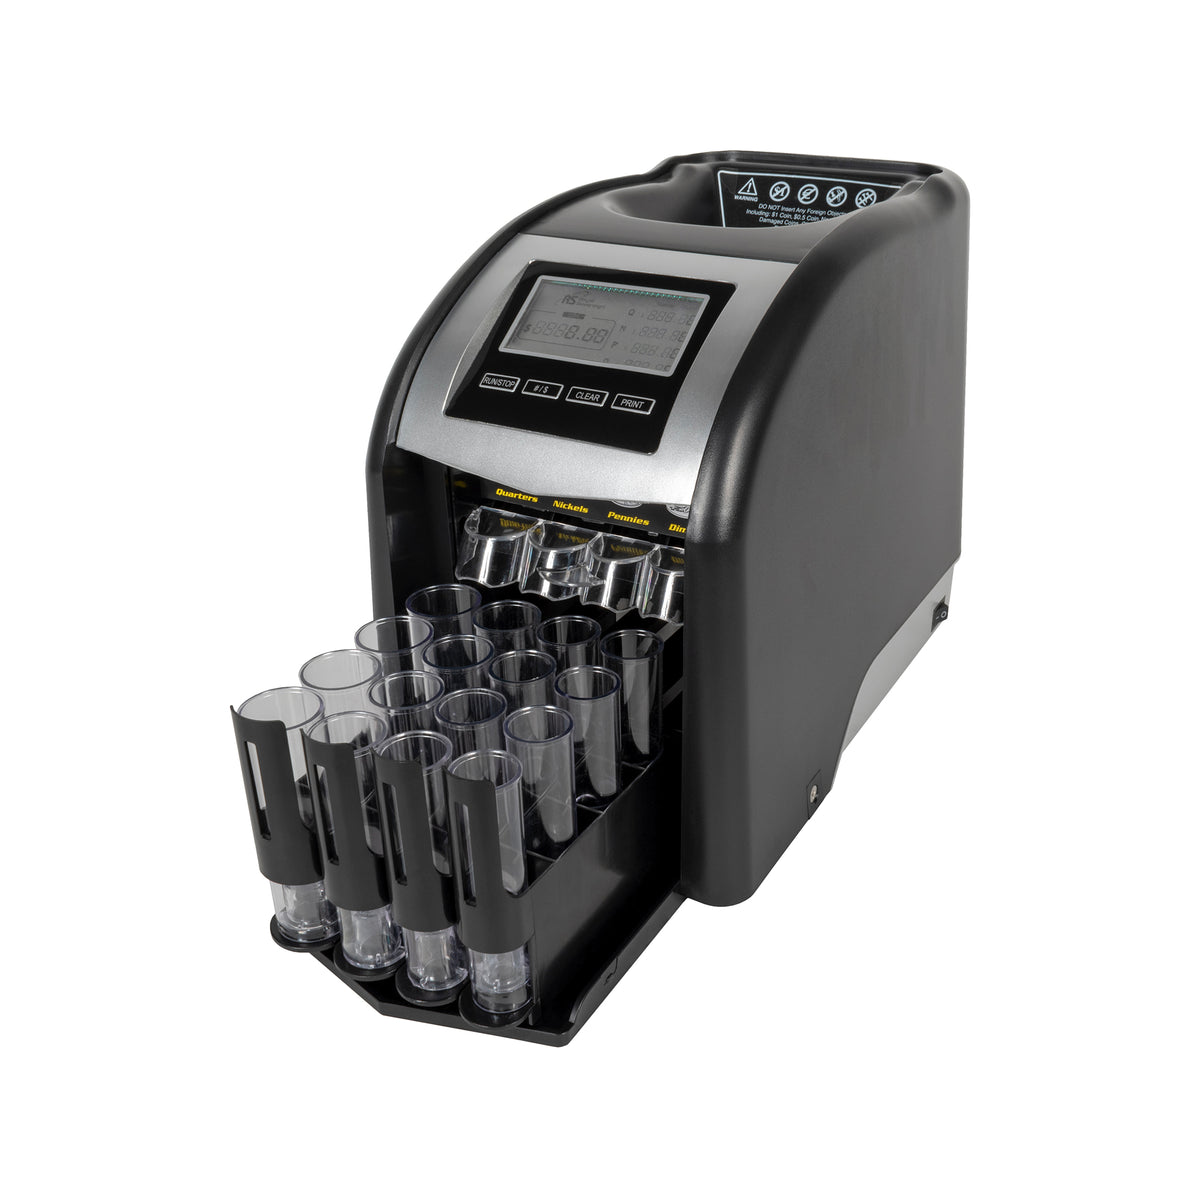 Royal Sovereign RCS-417-ADBK 4 Row Electric Coin Counter With Patented  Anti-Jam Technology 